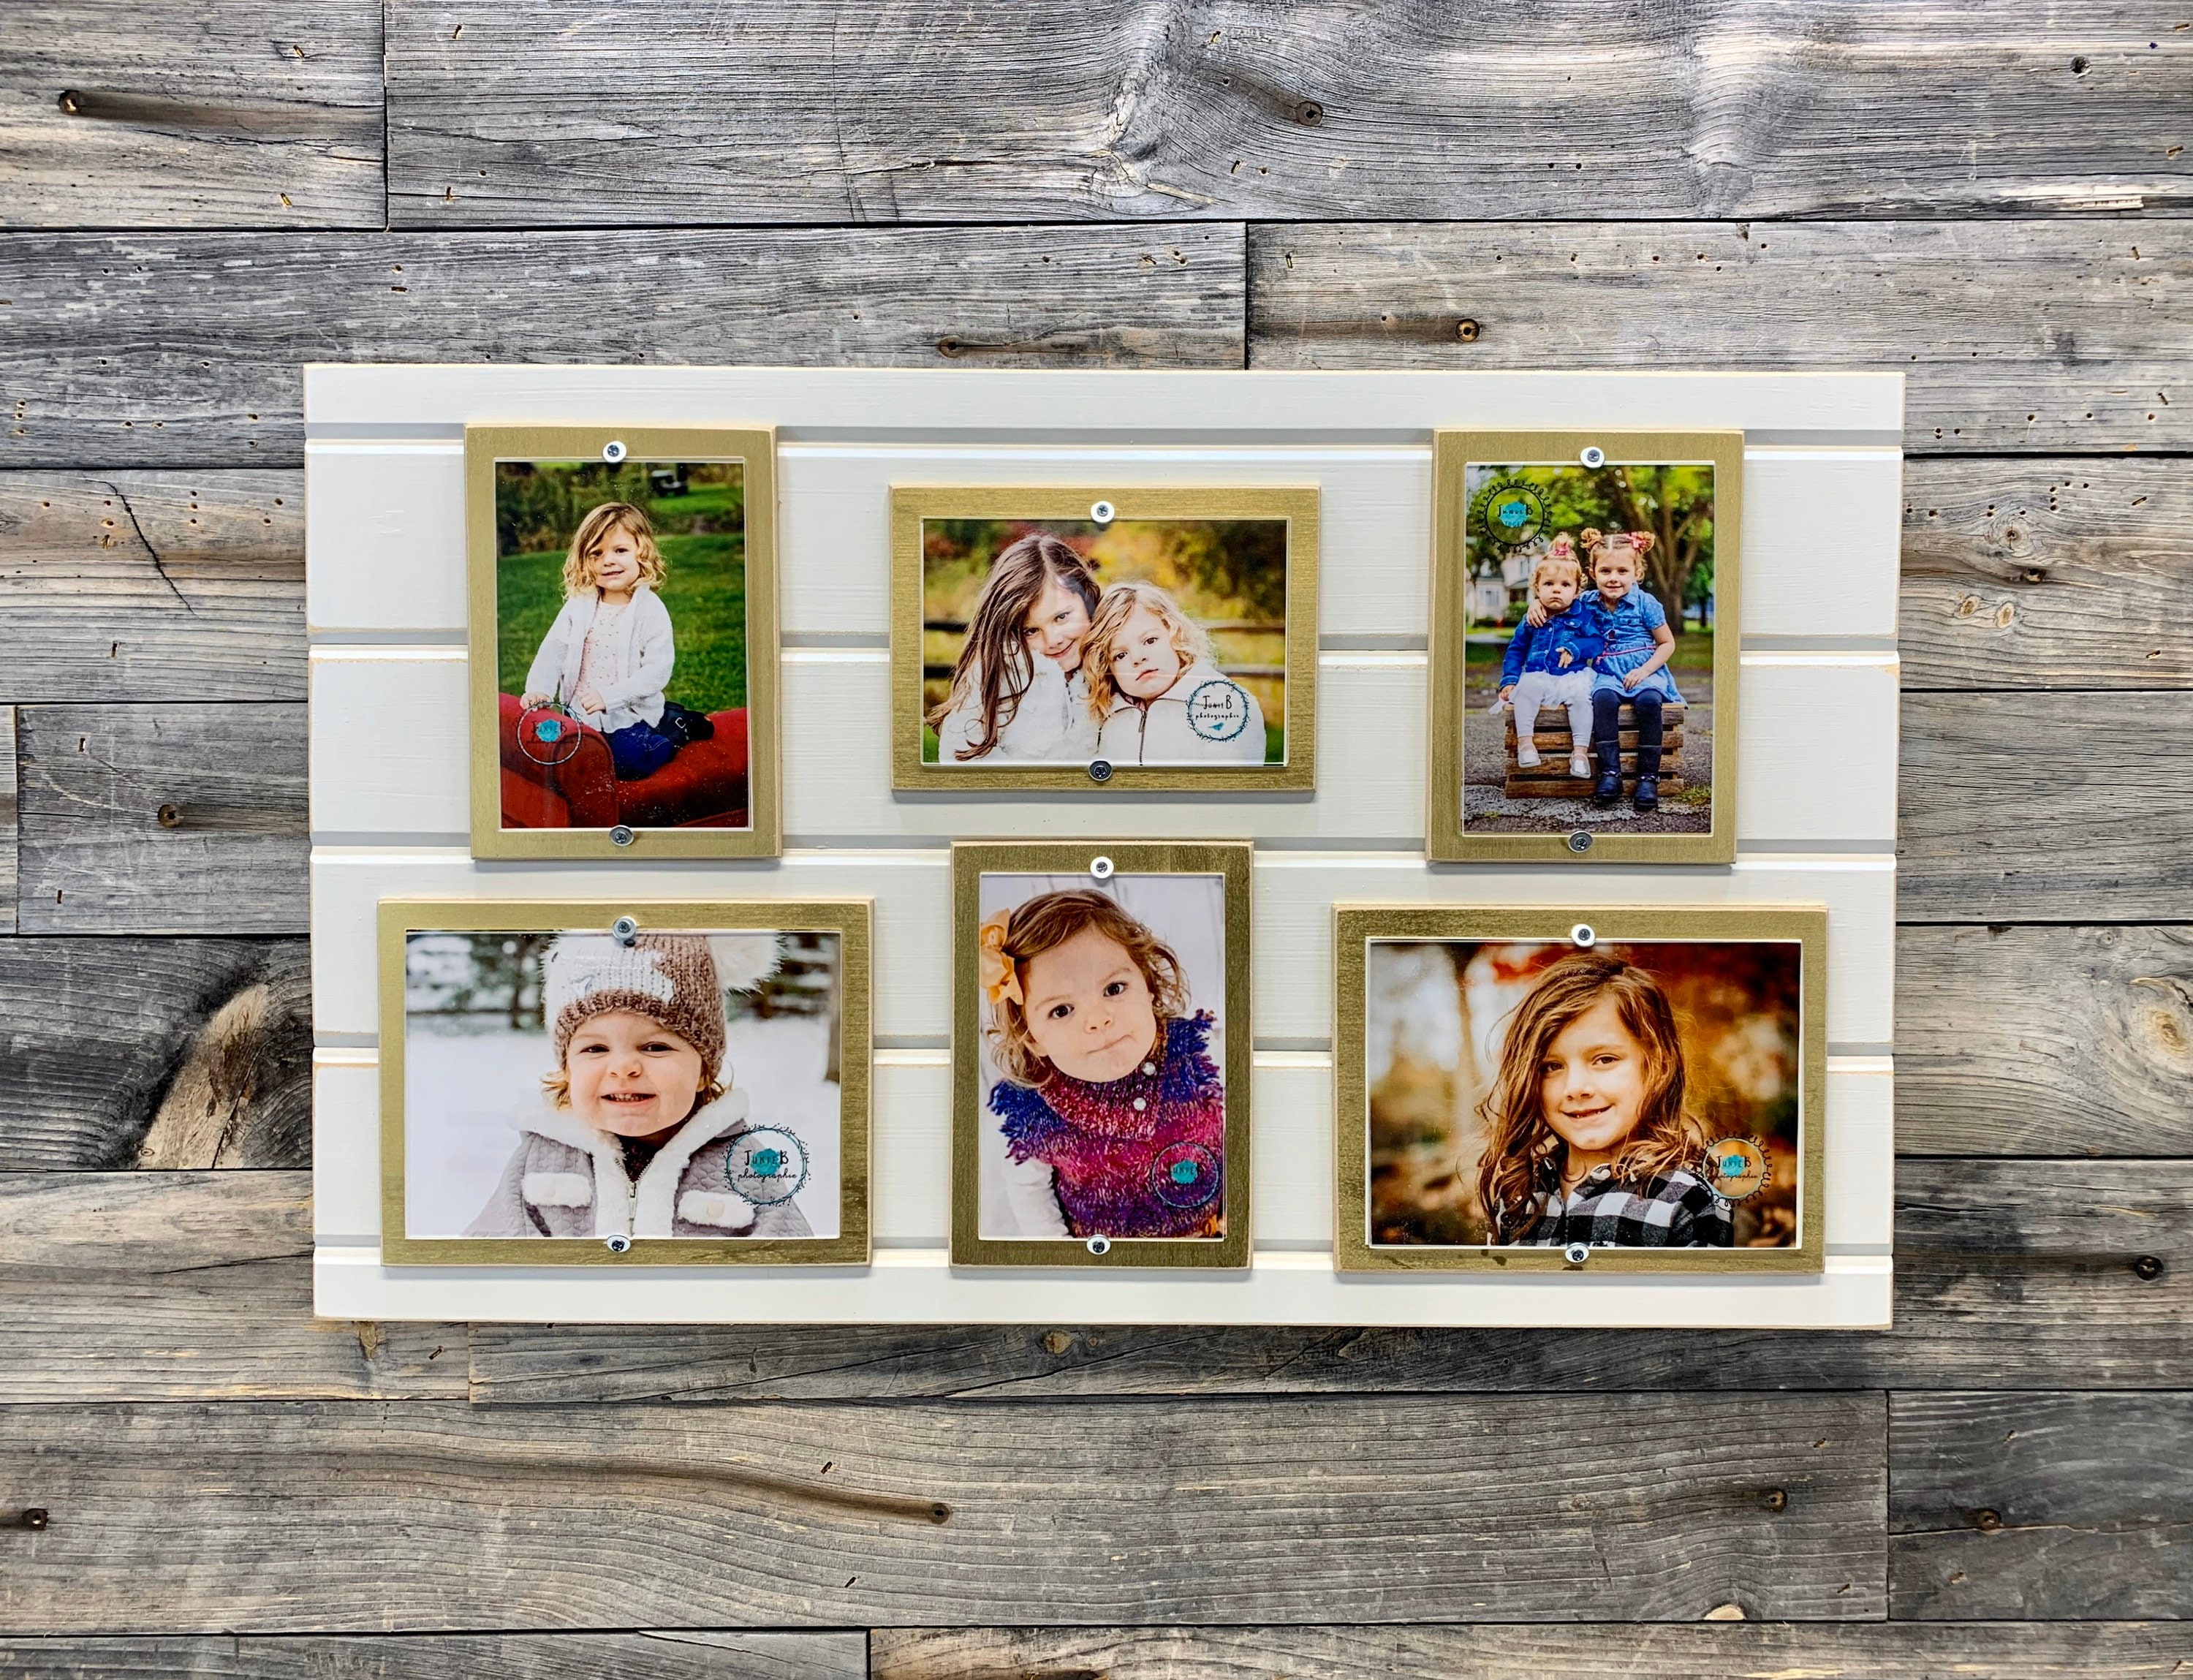 Juvale 50-Pack 4x6 Paper Picture Frames - DIY Black Photo Mats for  Inserting and Displaying Memorable Documents, Wall Decorations - Ideal for  4x6